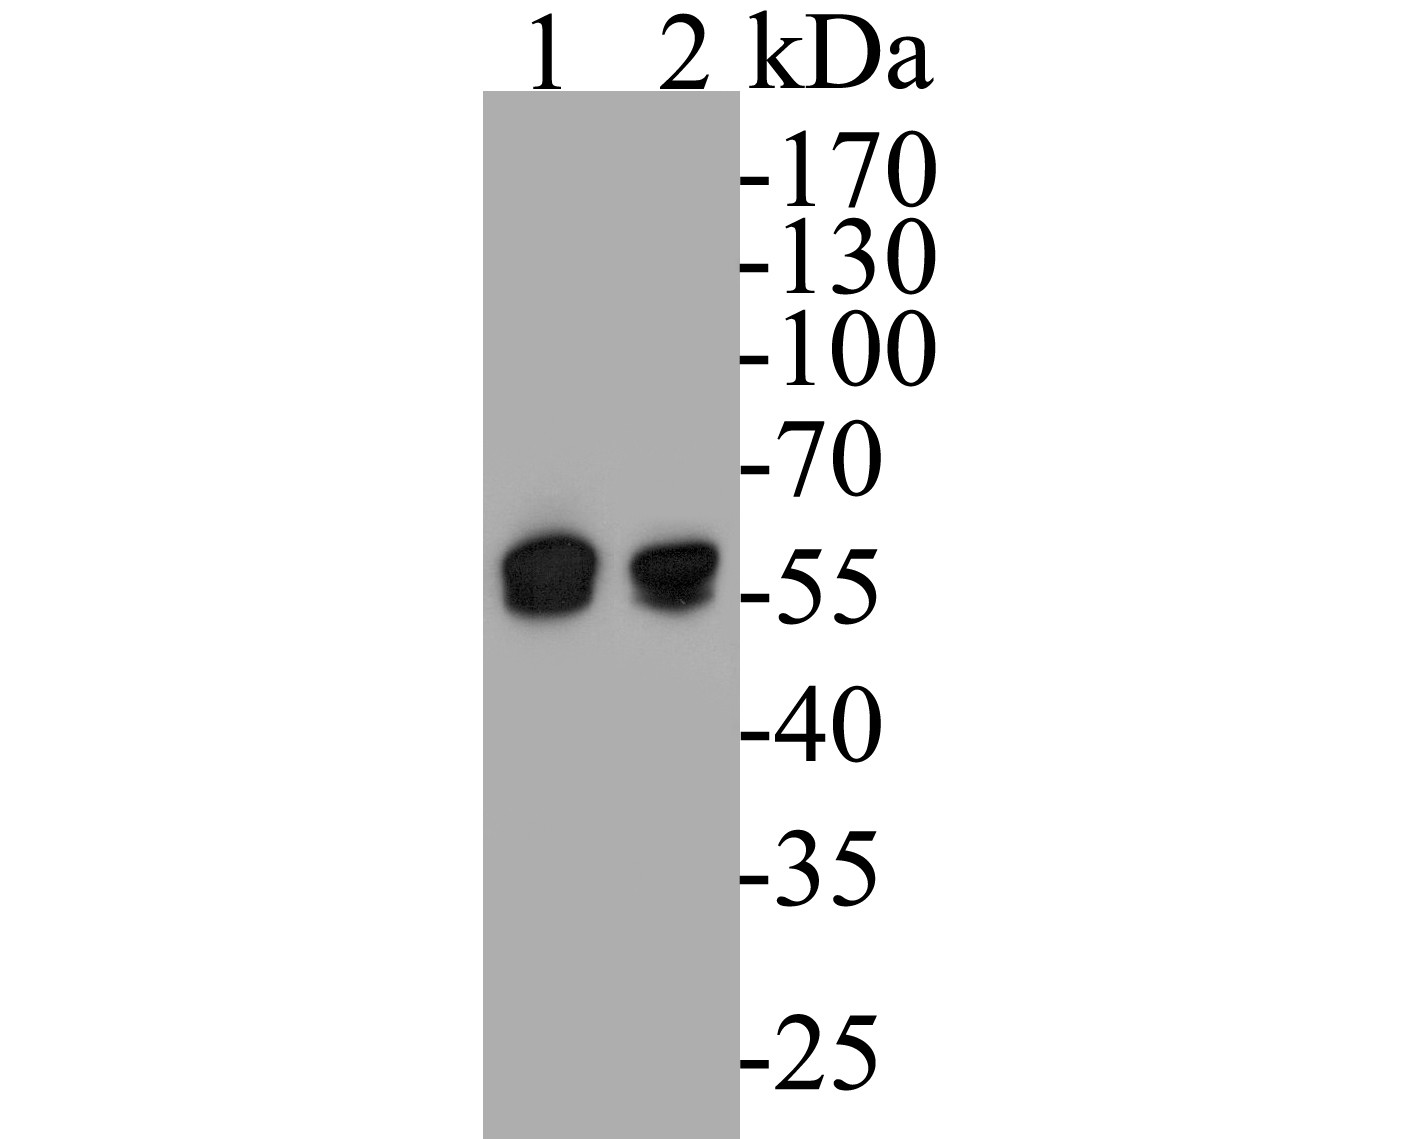 Western blot analysis of DFNA5/GSDME on different lysates. Proteins were transferred to a PVDF membrane and blocked with 5% BSA in PBS for 1 hour at room temperature. The primary antibody (EM1901-48, 1/500) was used in 5% BSA at room temperature for 2 hours. Goat Anti-Mouse IgG - HRP Secondary Antibody (HA1006) at 1:5,000 dilution was used for 1 hour at room temperature.<br />
Positive control: <br />
Lane 1: Hela cell lysate<br />
Lane 2: HepG2 cell lysate